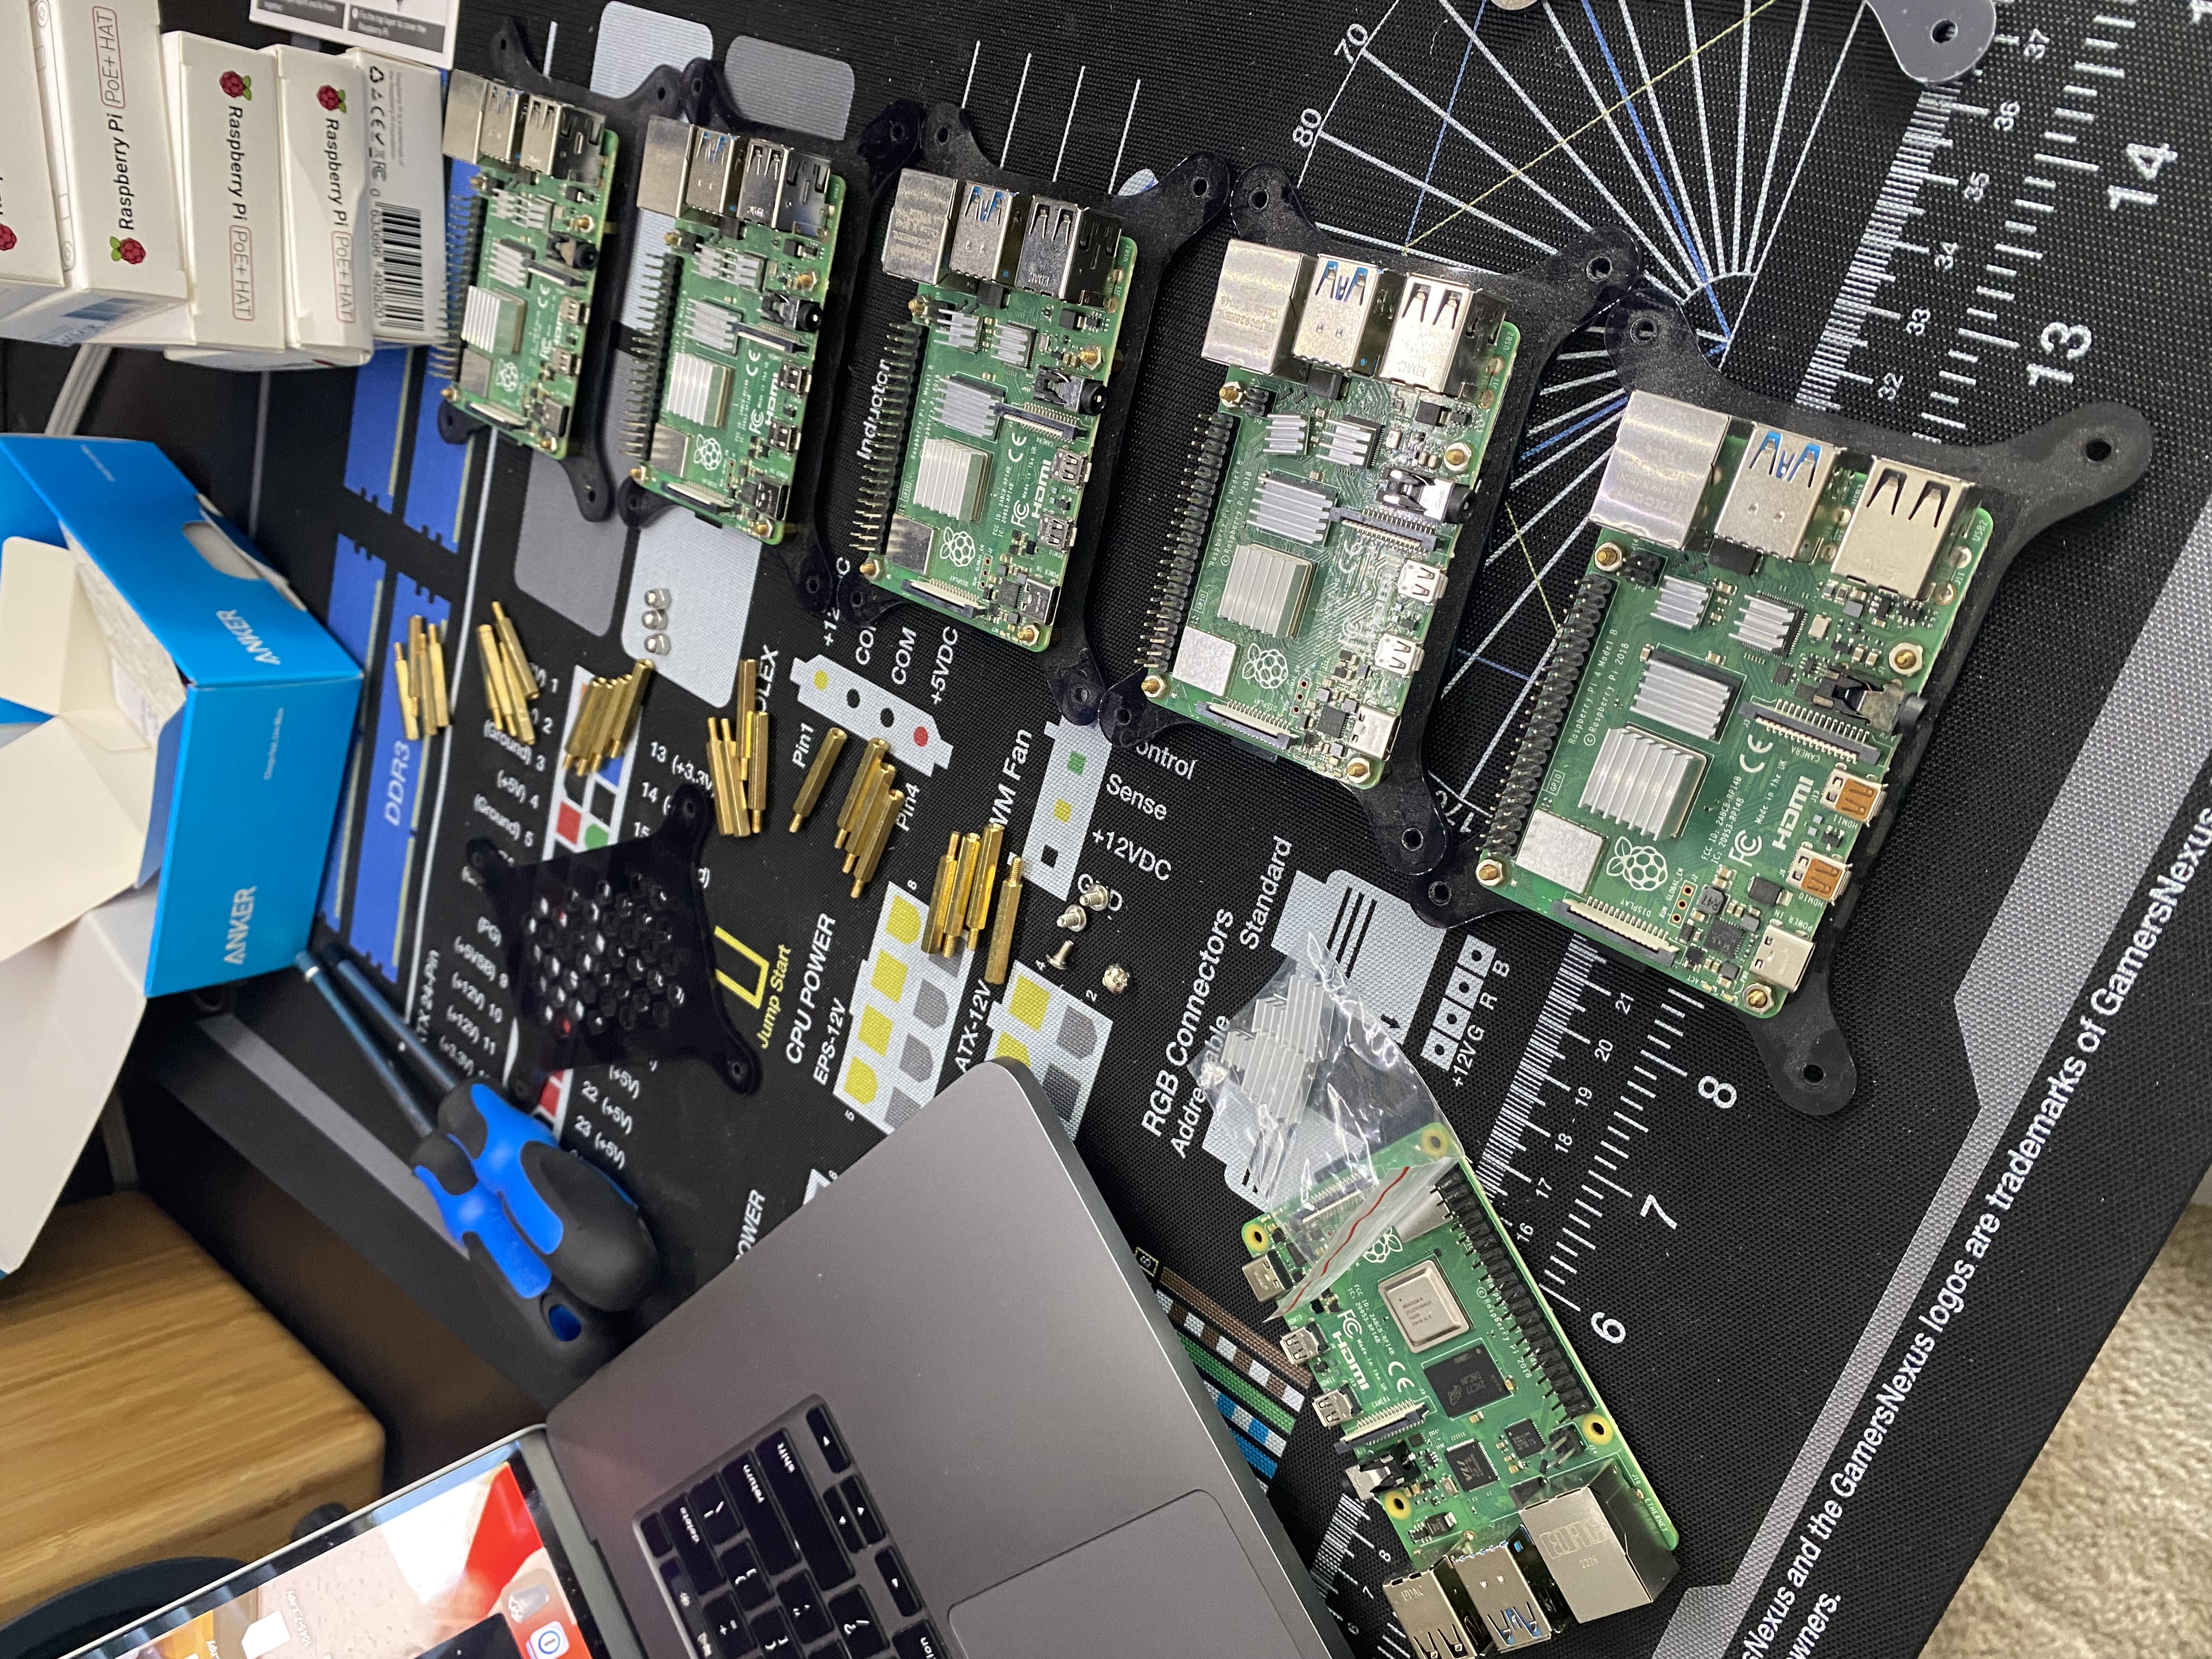 Six Raspberry Pi boards, all on the desk.